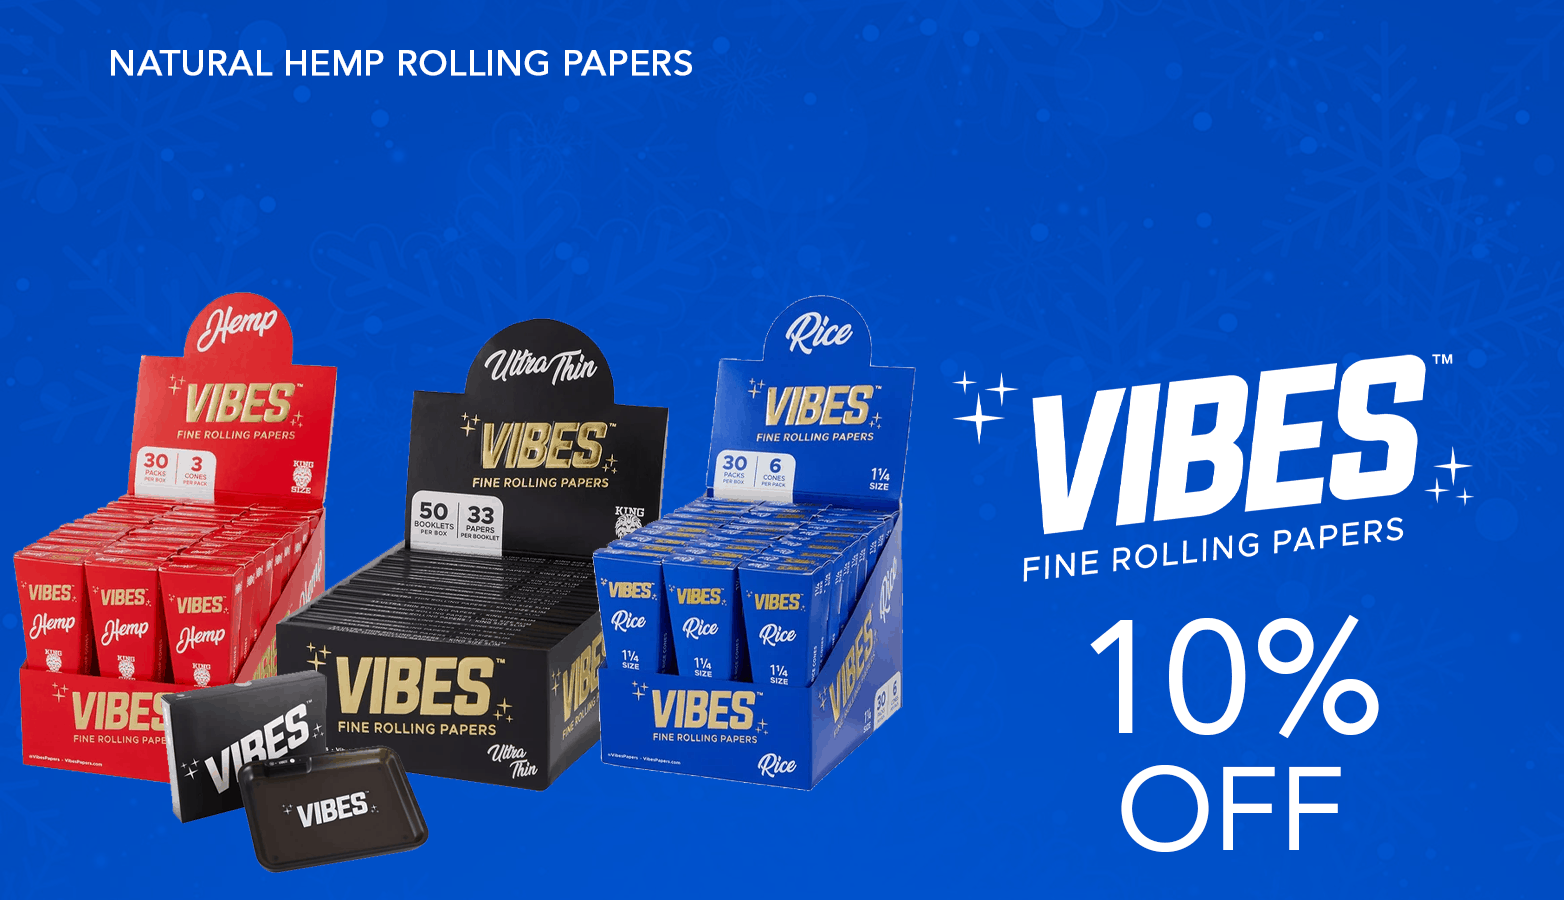 Vibes Cannabis Coupon Code Offer Website